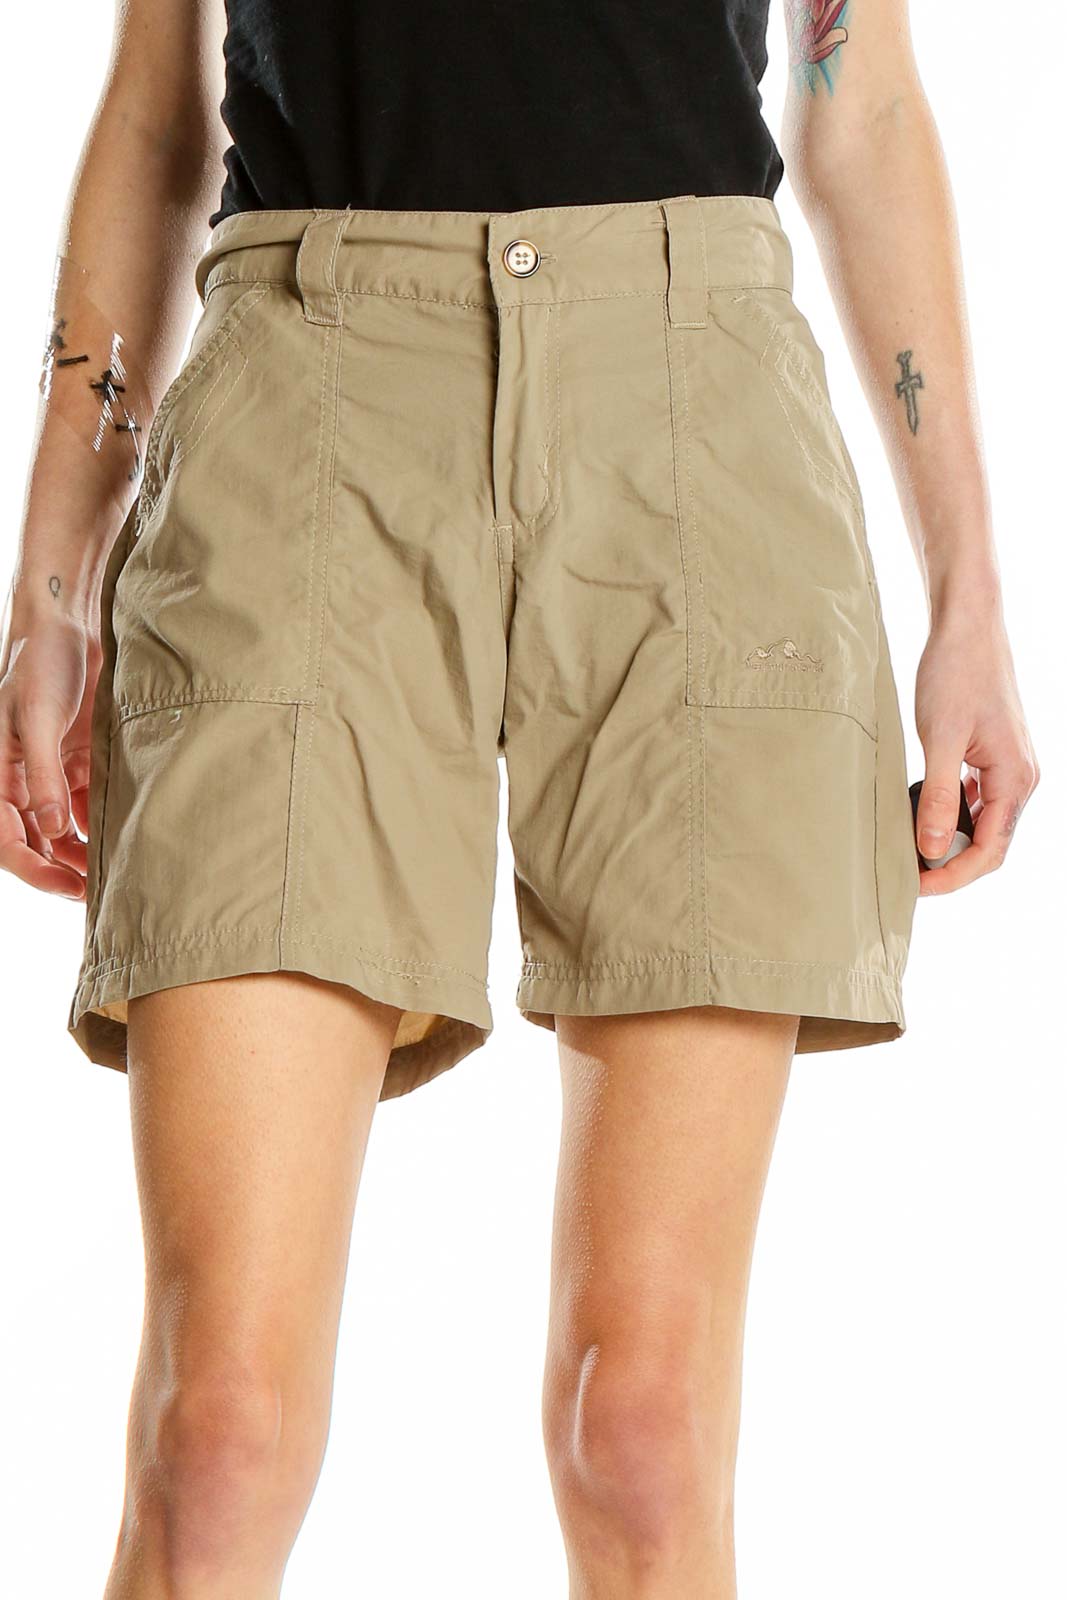 Brown Shorts Front